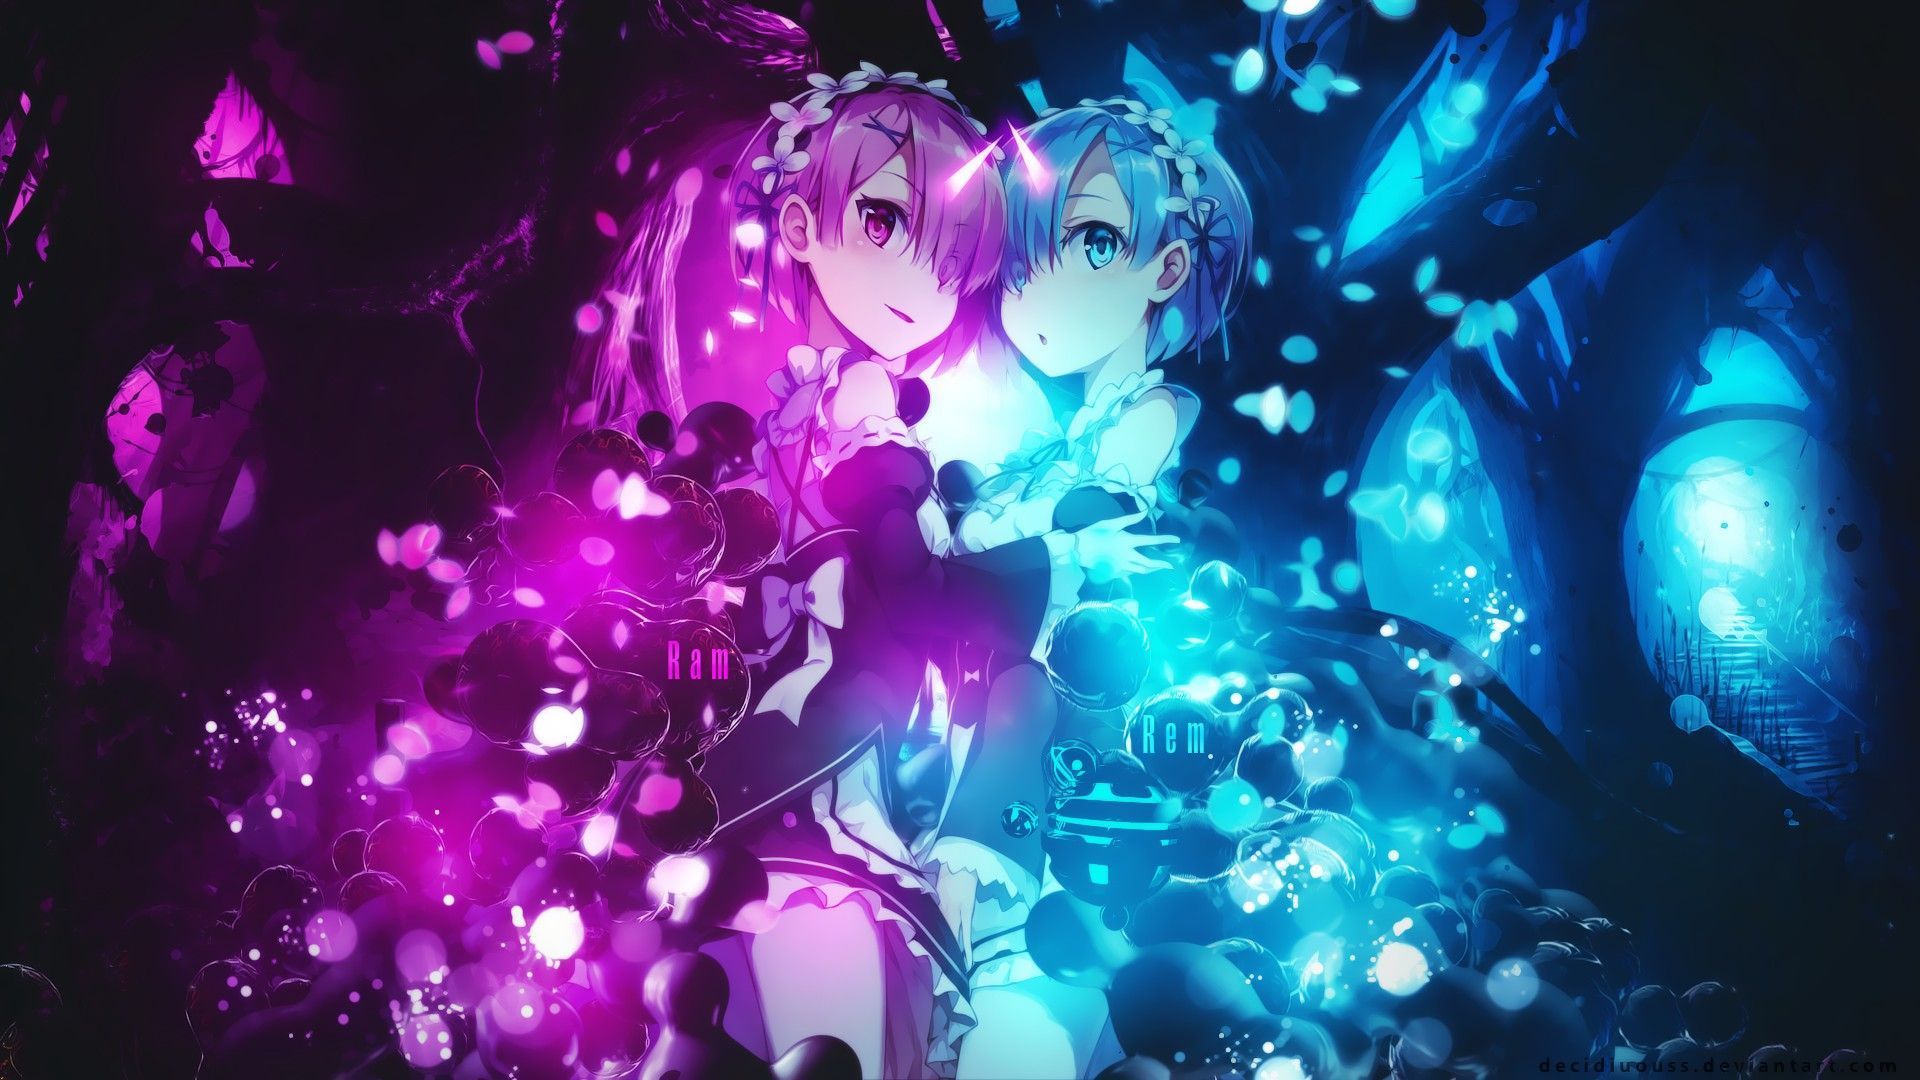 Ram and Rem Wallpaper Free Ram and Rem Background